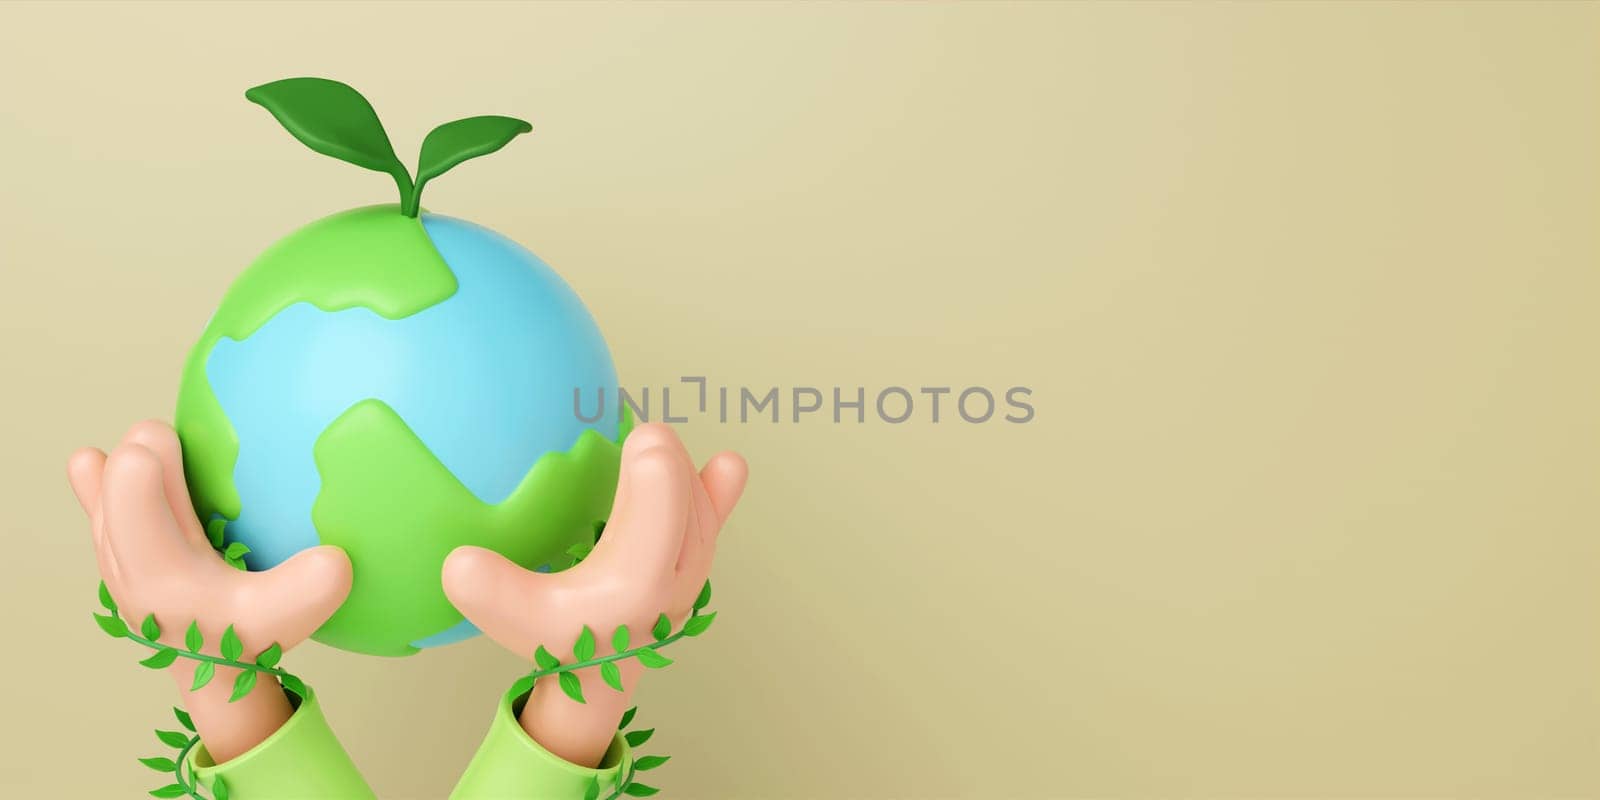 3d hand holding a planet earth isolated on yellow background. Sustain earth concept. Save Earth. Environment Concept. 3d rendering illustration. by meepiangraphic